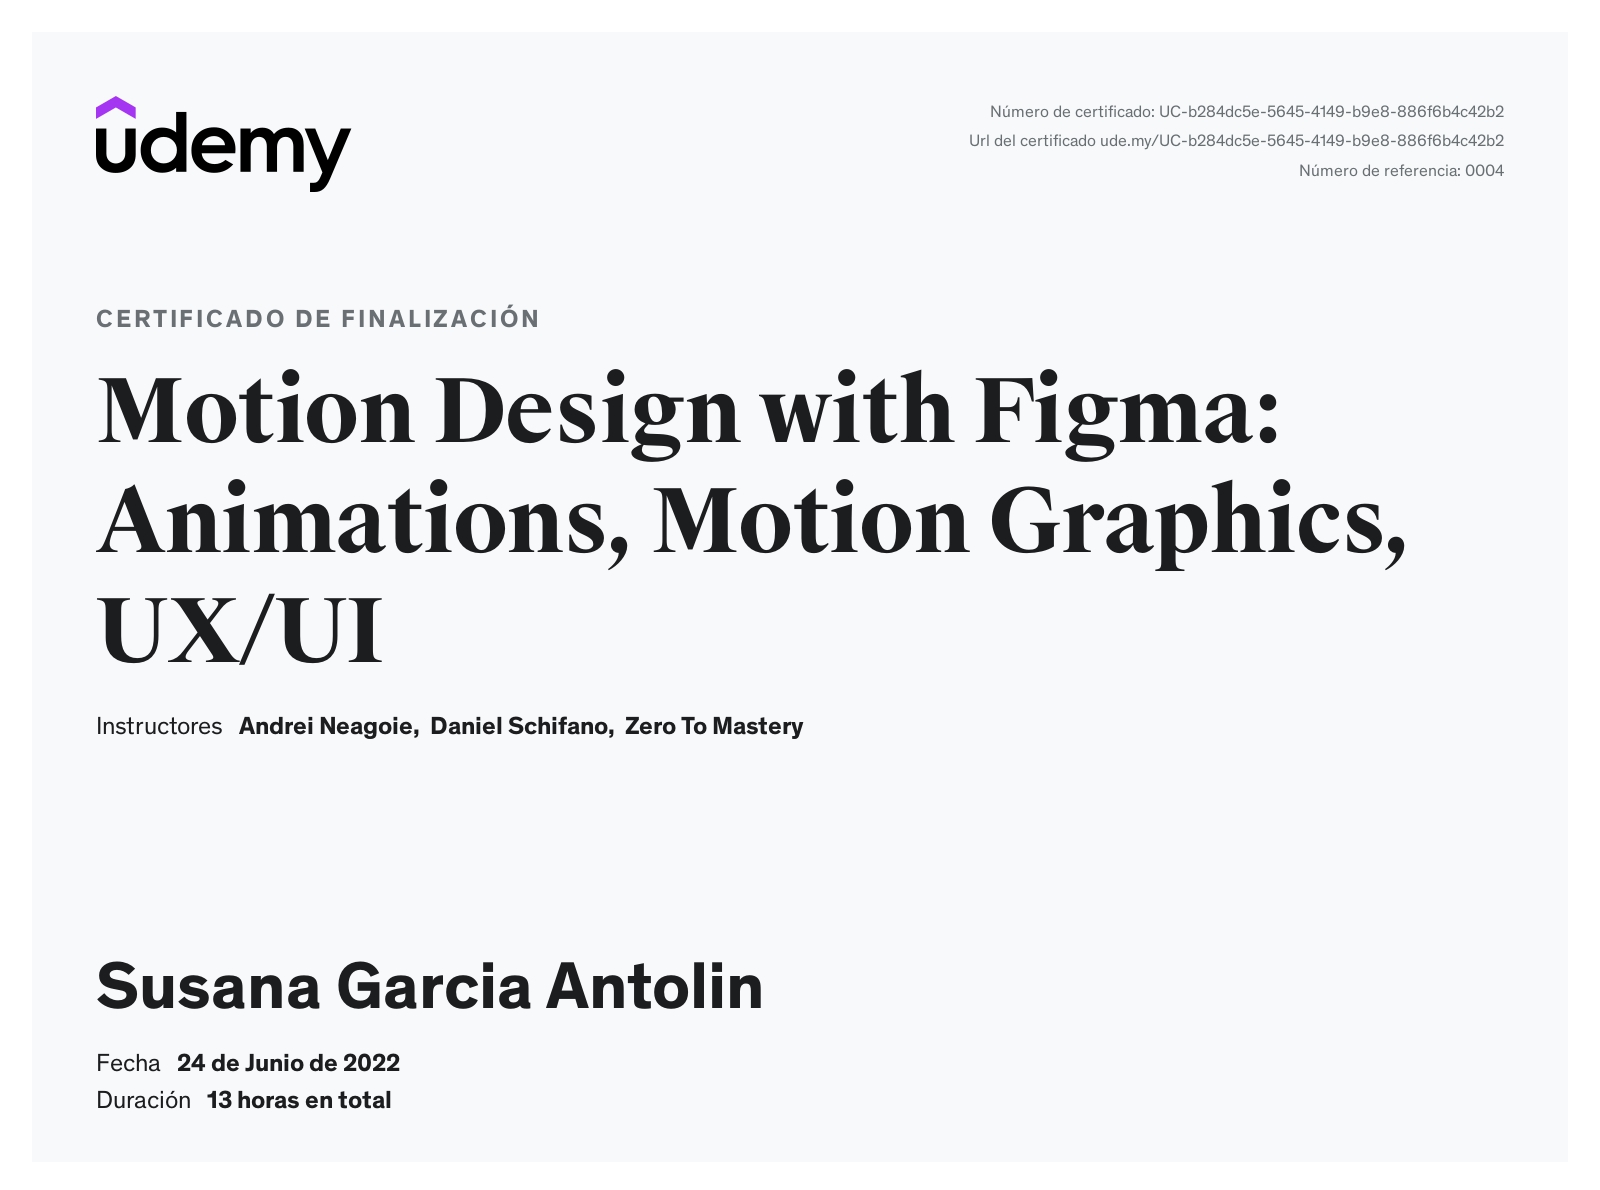 Motion design with Figma: Animations, Motion Graphics UX/UI